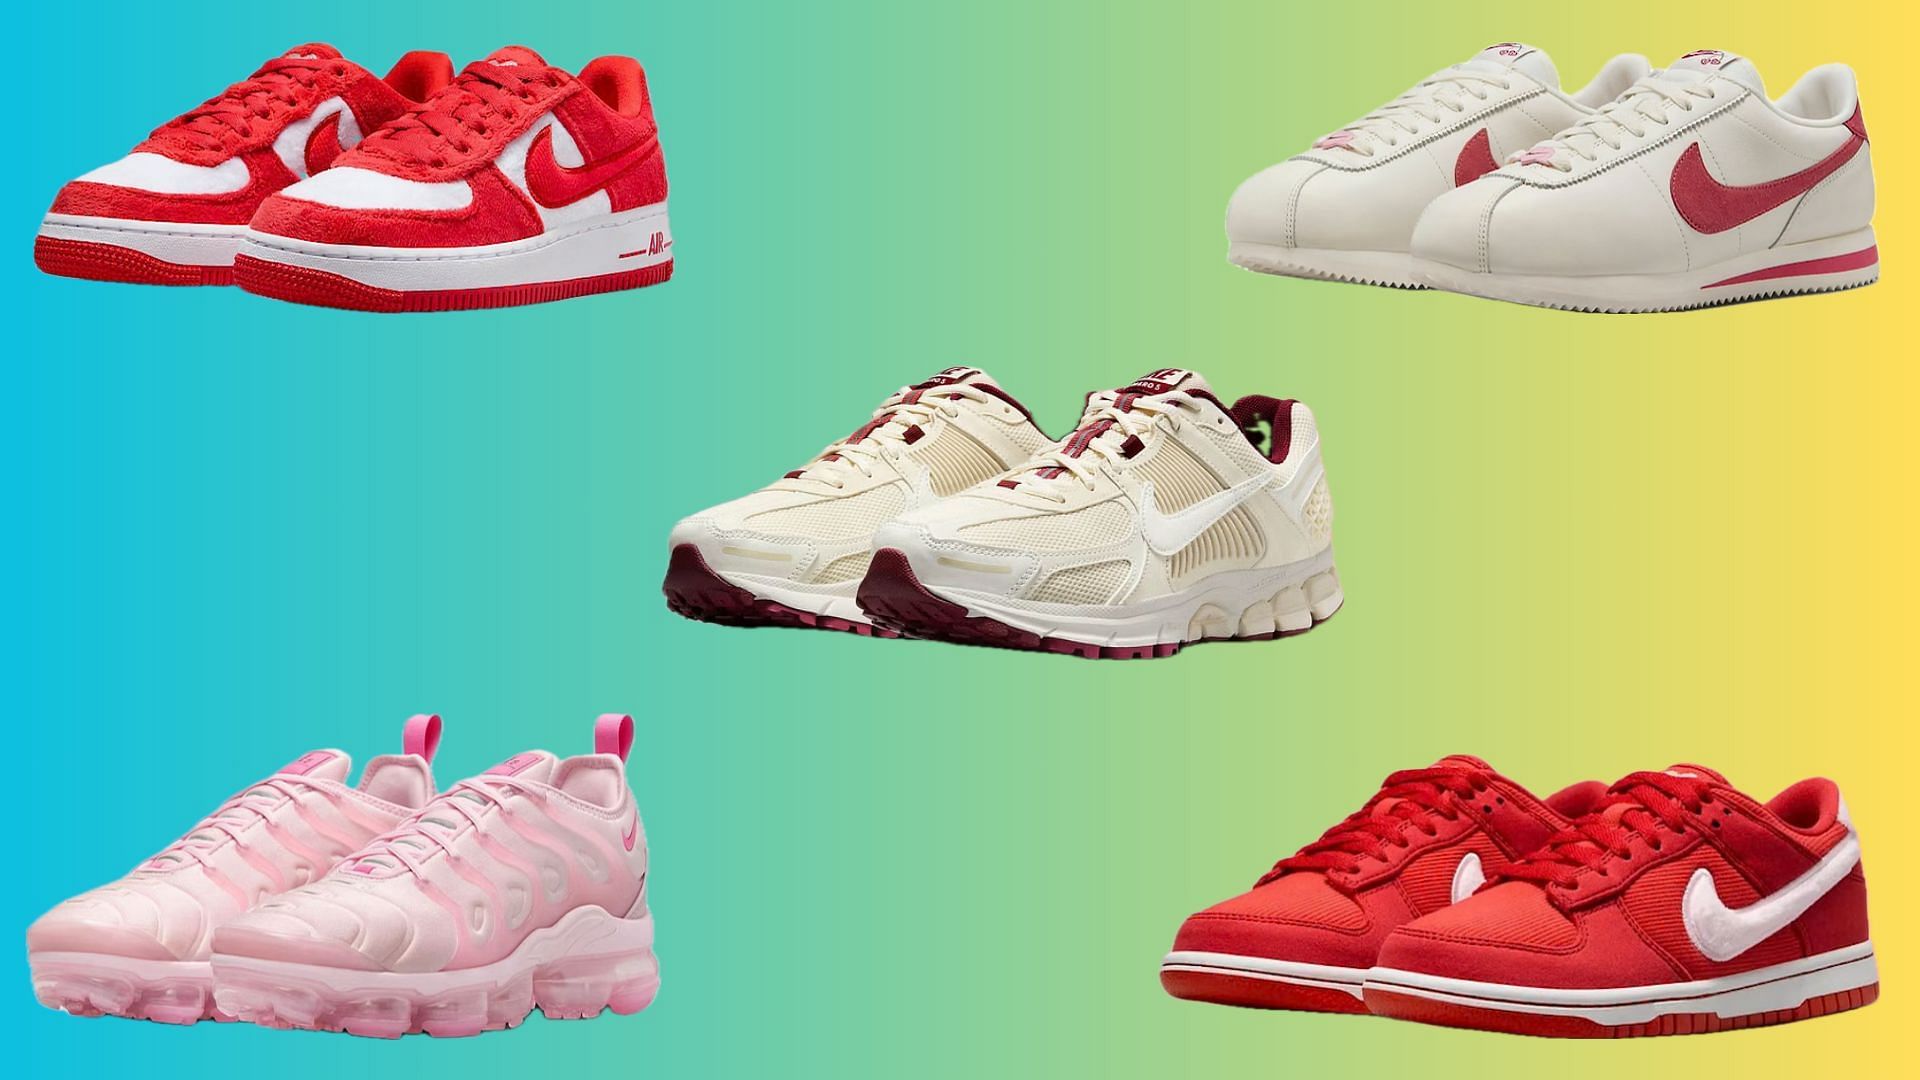 Five stylish Nike sneaker releases planned for Valentine